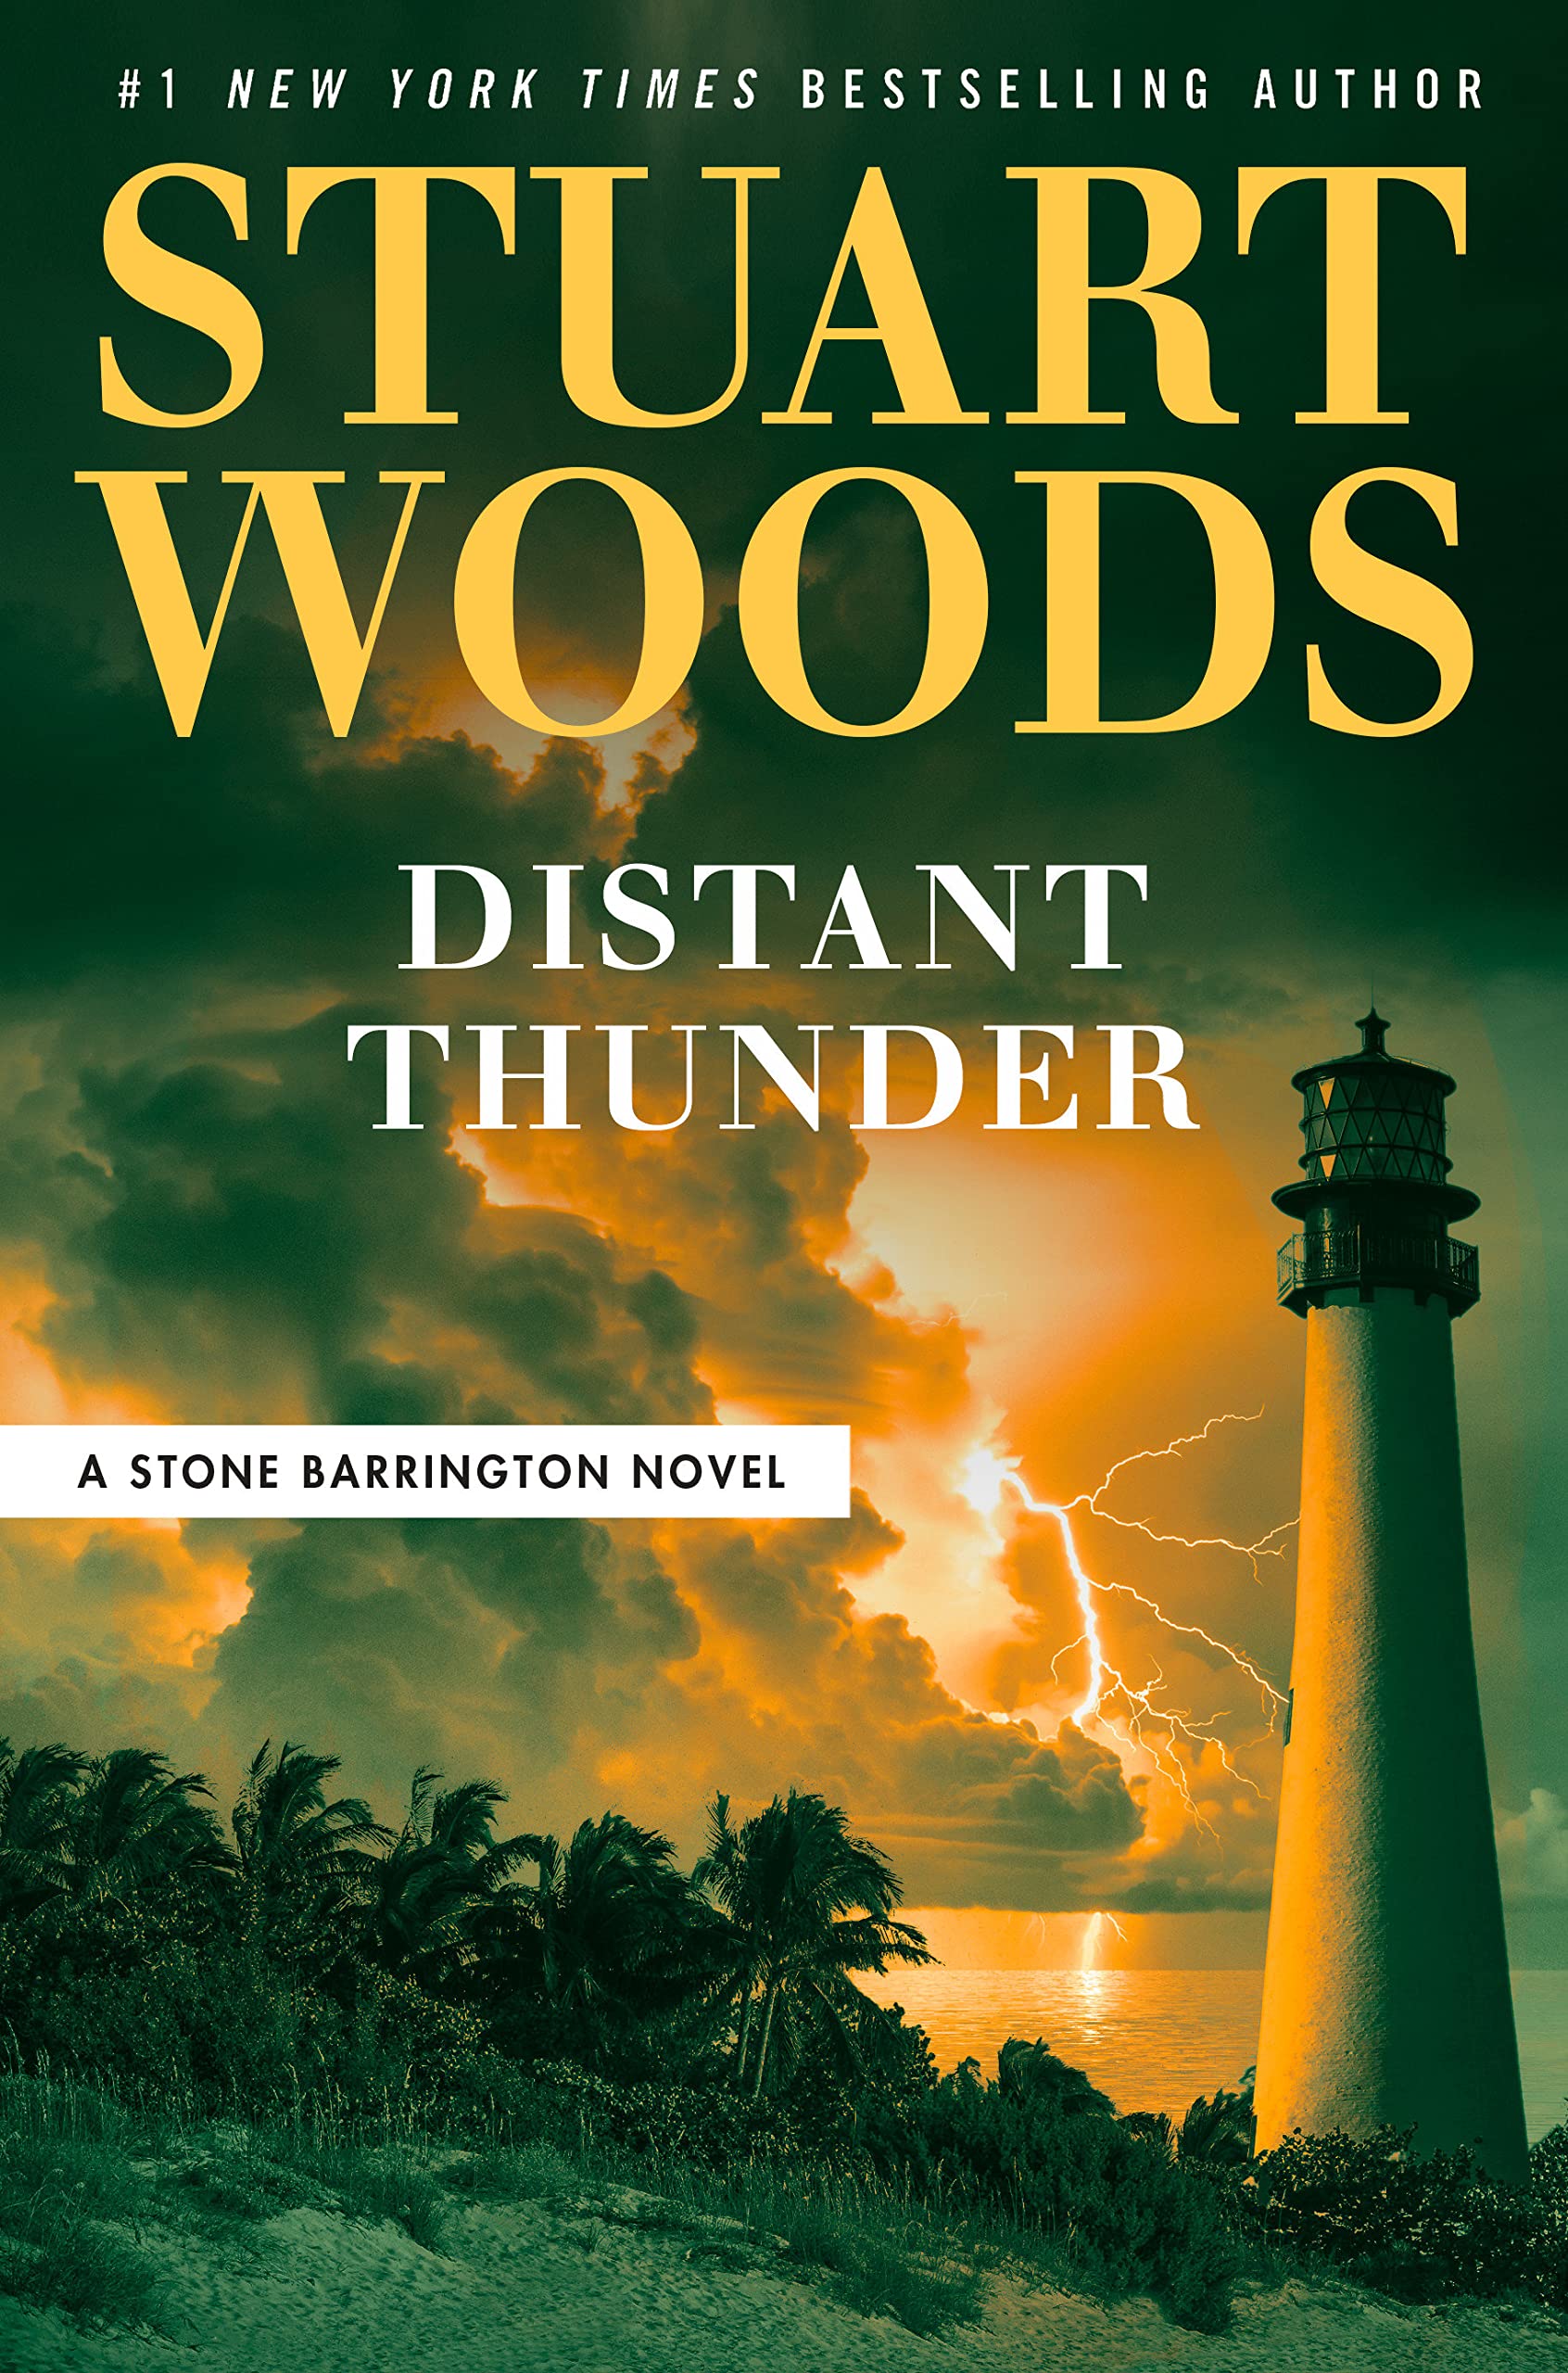 Image for "Distant Thunder"